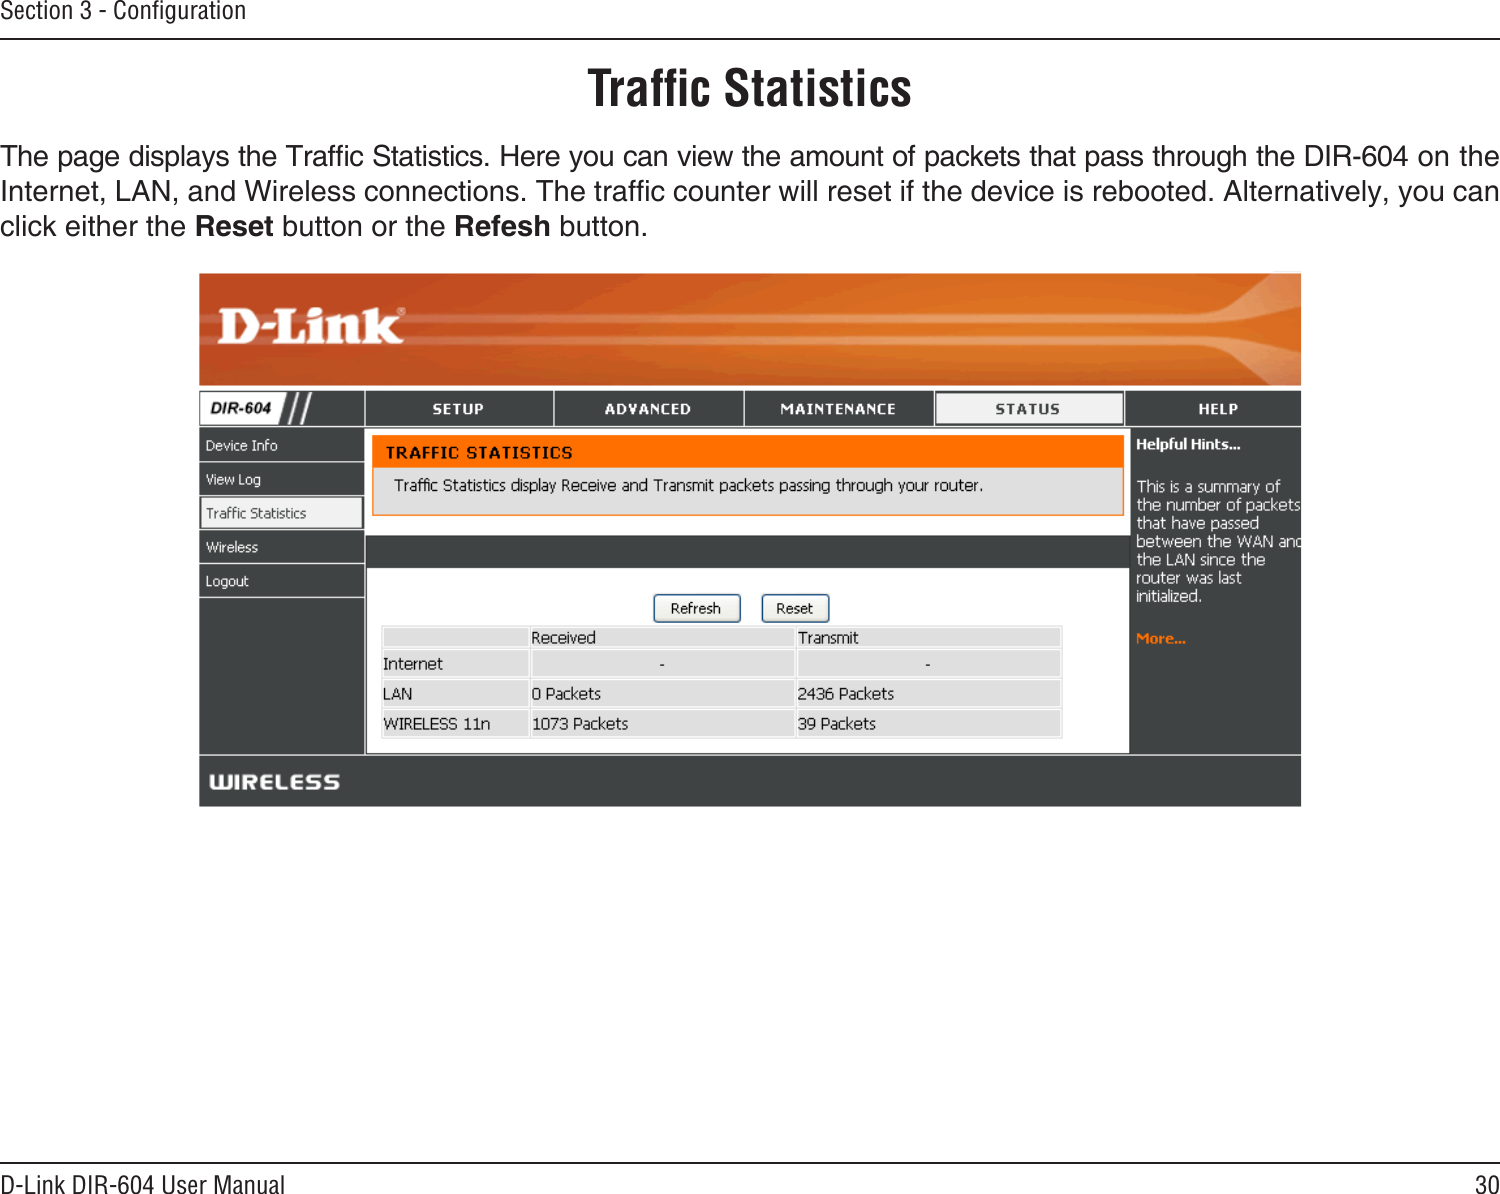 30D-Link DIR-604 User ManualSection 3 - ConﬁgurationTrafﬁc StatisticsThe page displays the Trafc Statistics. Here you can view the amount of packets that pass through the DIR-604 on the Internet, LAN, and Wireless connections. The trafc counter will reset if the device is rebooted. Alternatively, you can click either the Reset button or the Refesh button.